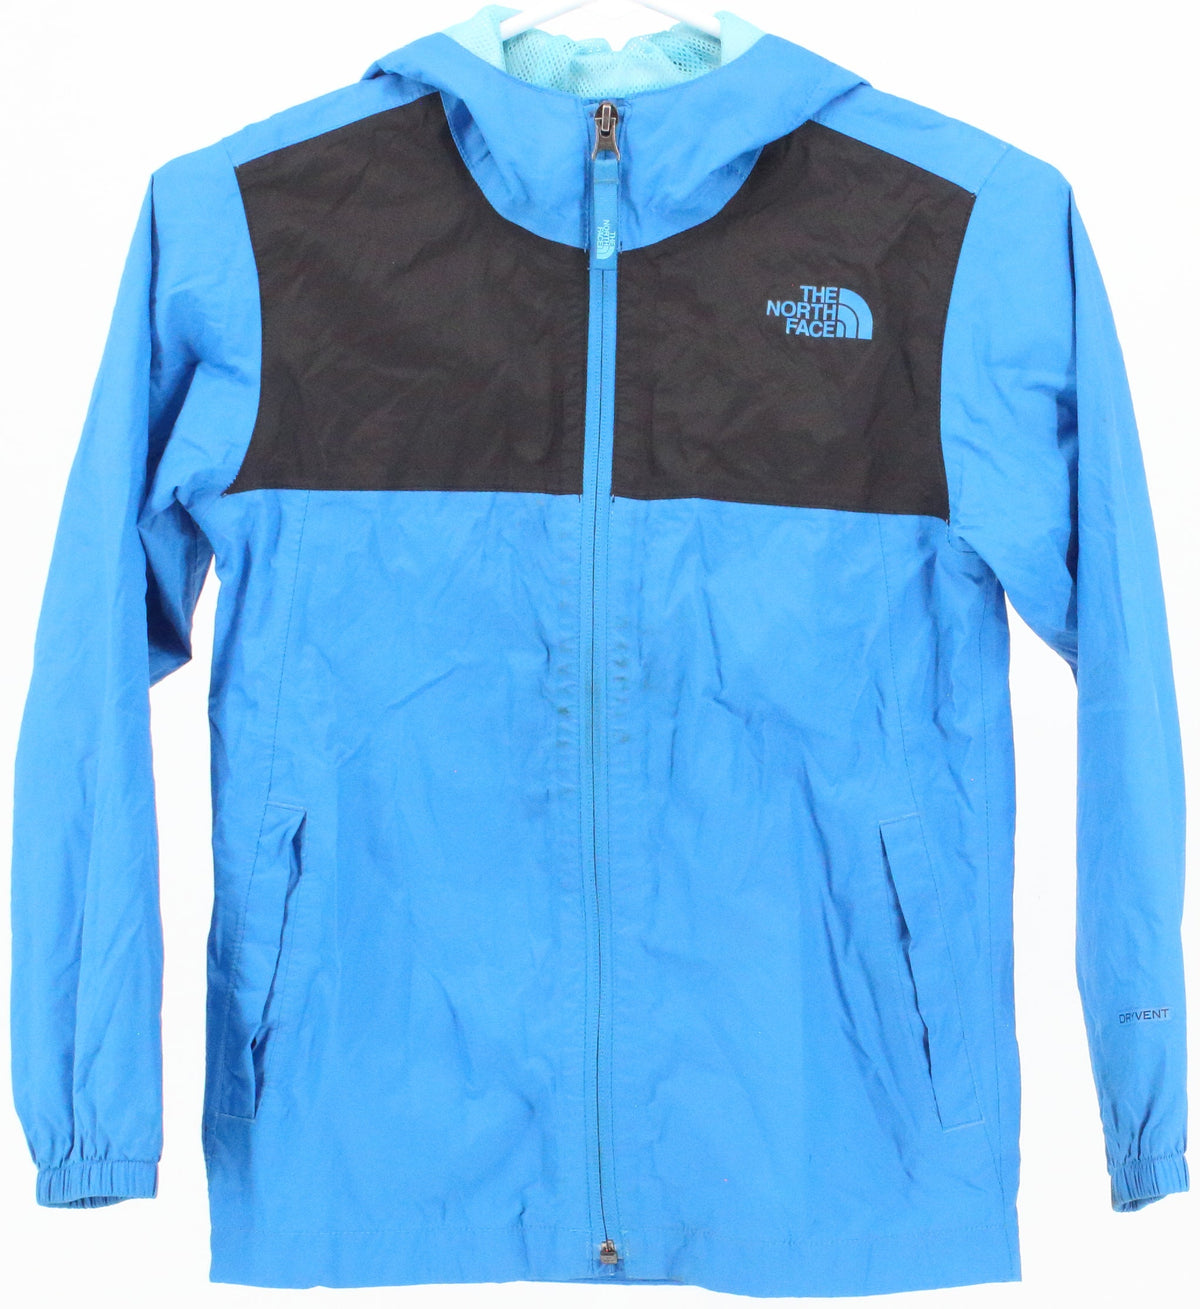 The North Face DryVent Royal Blue and Black Boy's Nylon Jacket